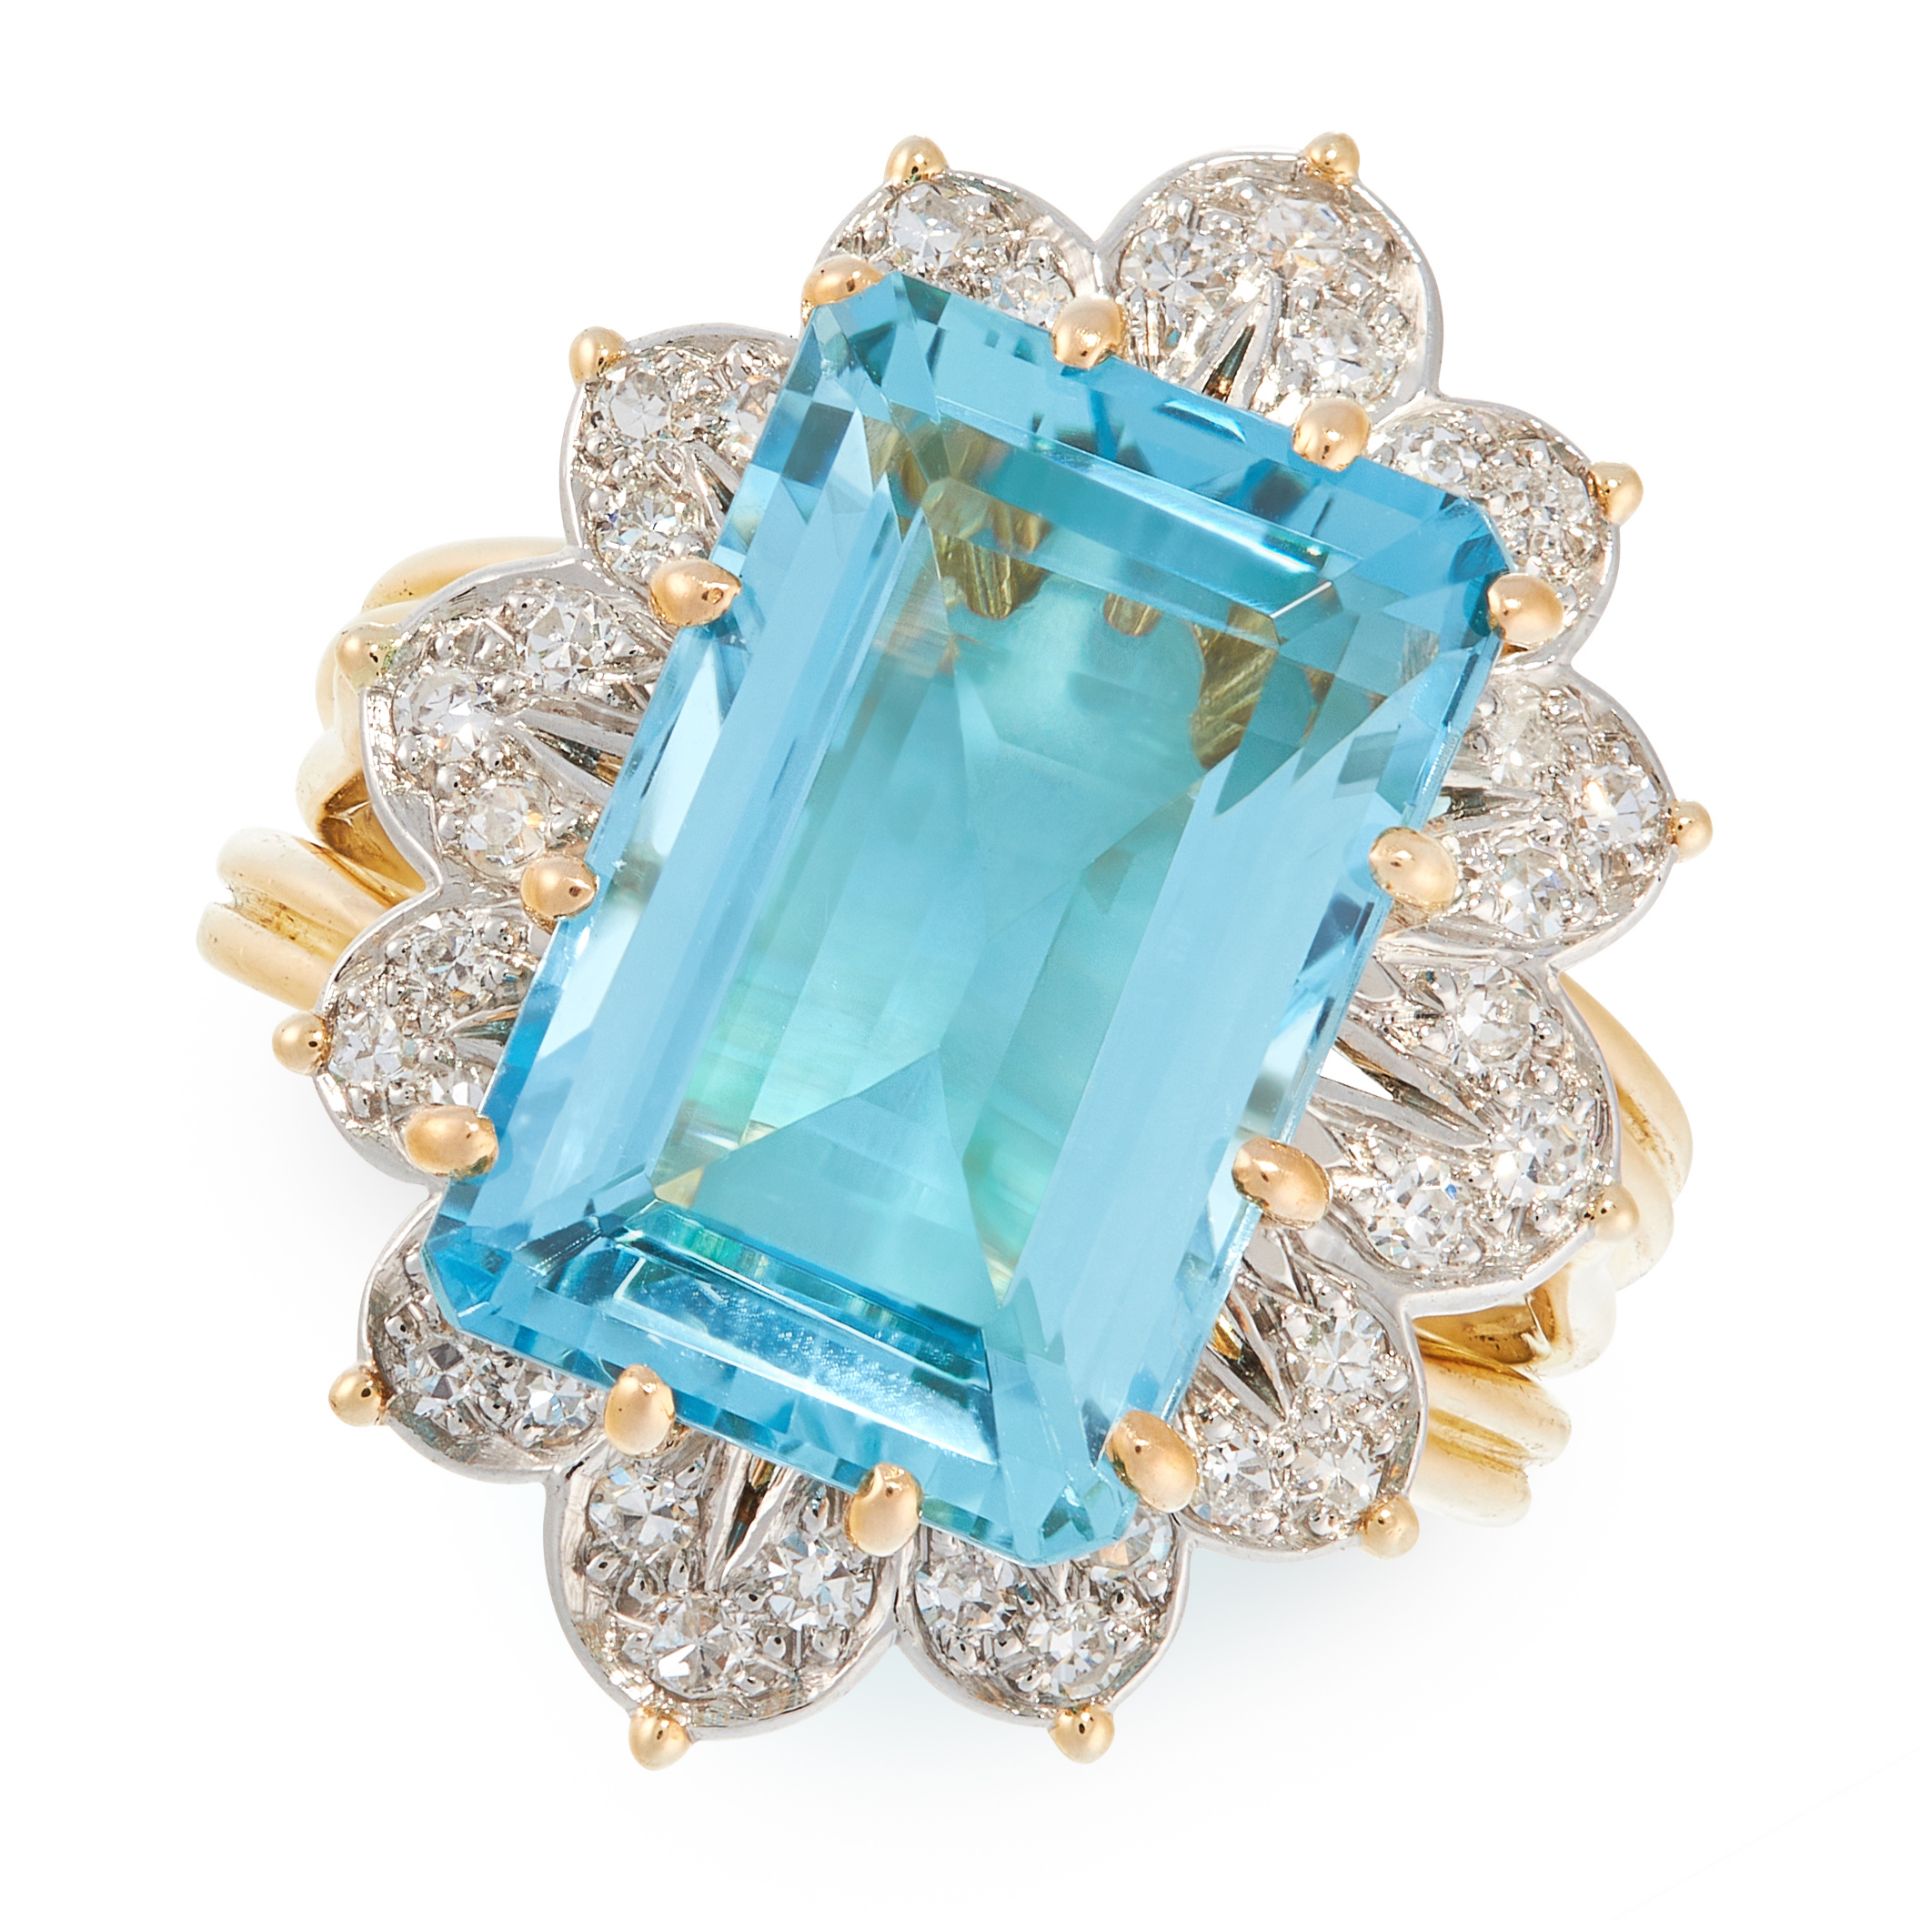 A VINTAGE AQUAMARINE AND DIAMOND DRESS RING, MONTURE CARTIER in high carat yellow gold, set with